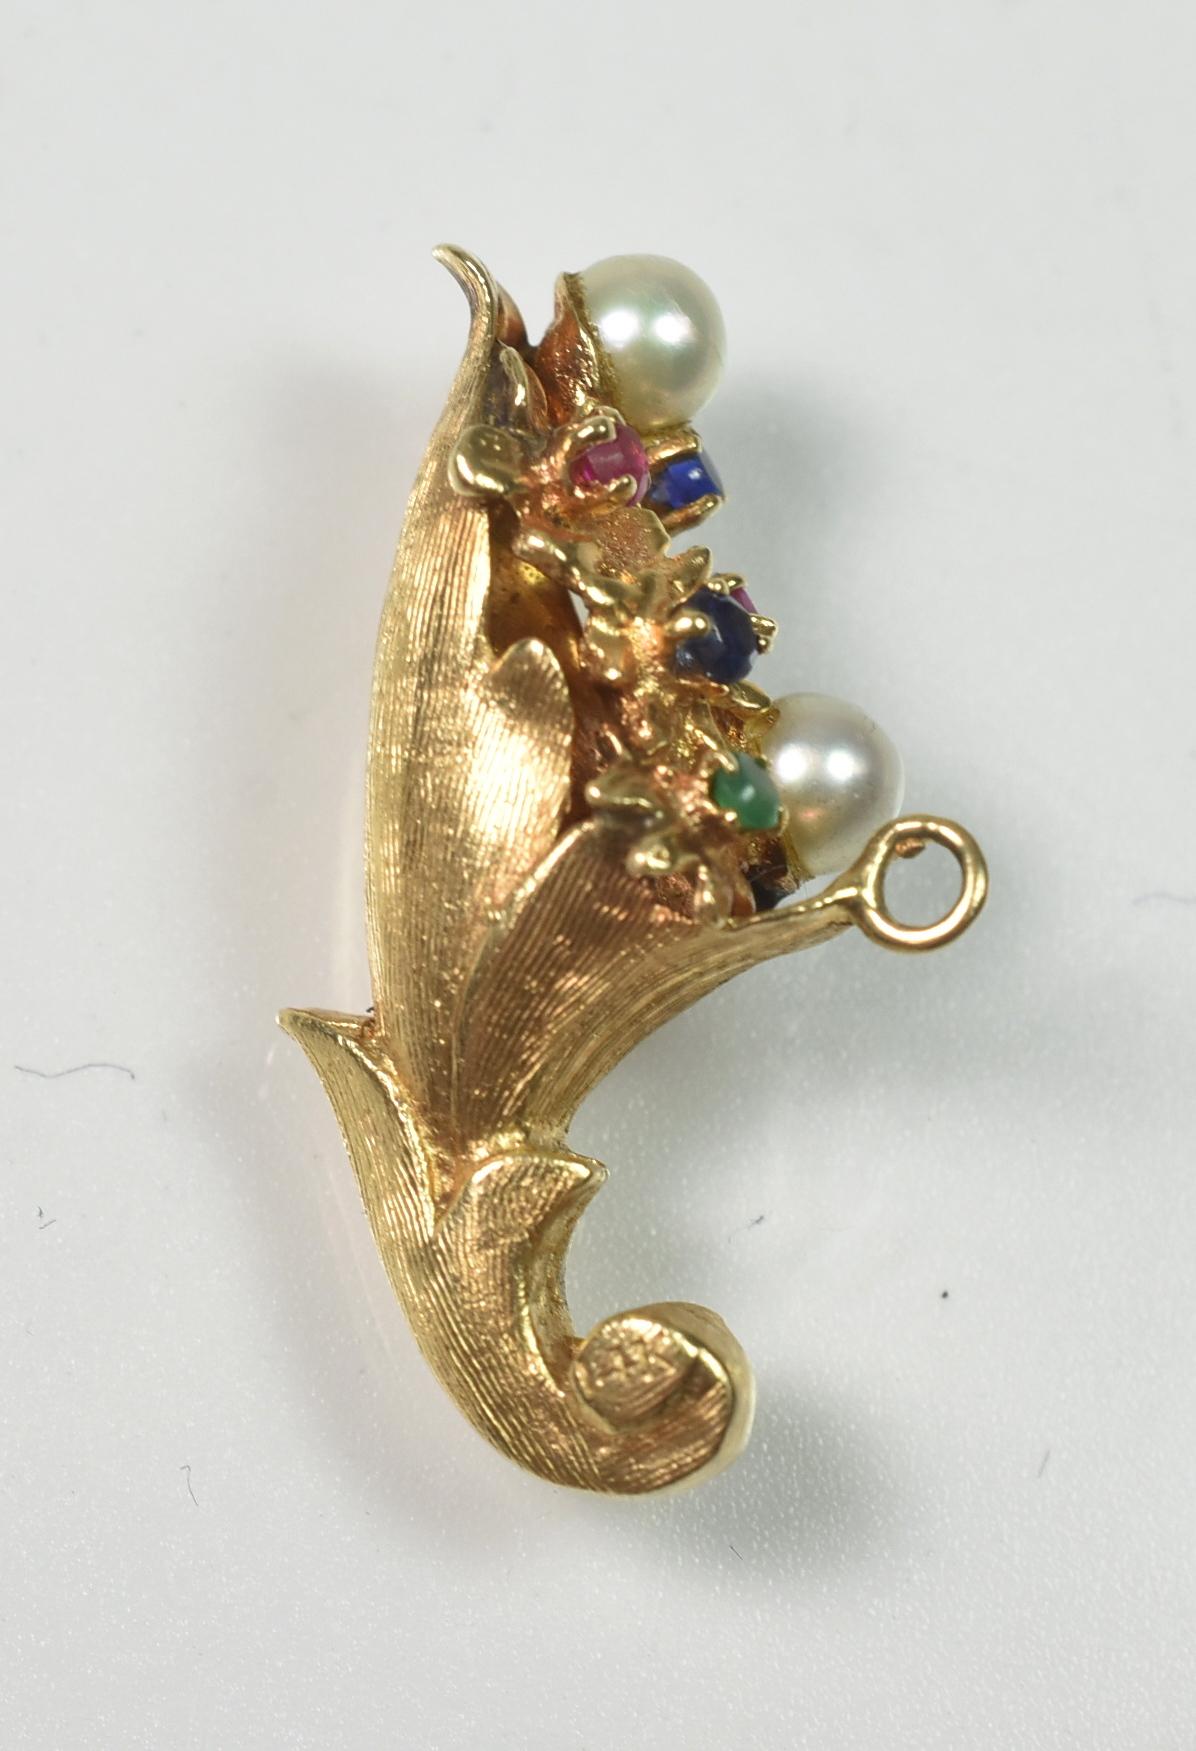 Fine jewelry cornucopia pendant with pearls. ruby, sapphires, and emerald, stamped 14K. Very good to excellent condition. Dimensions: 1 1/8